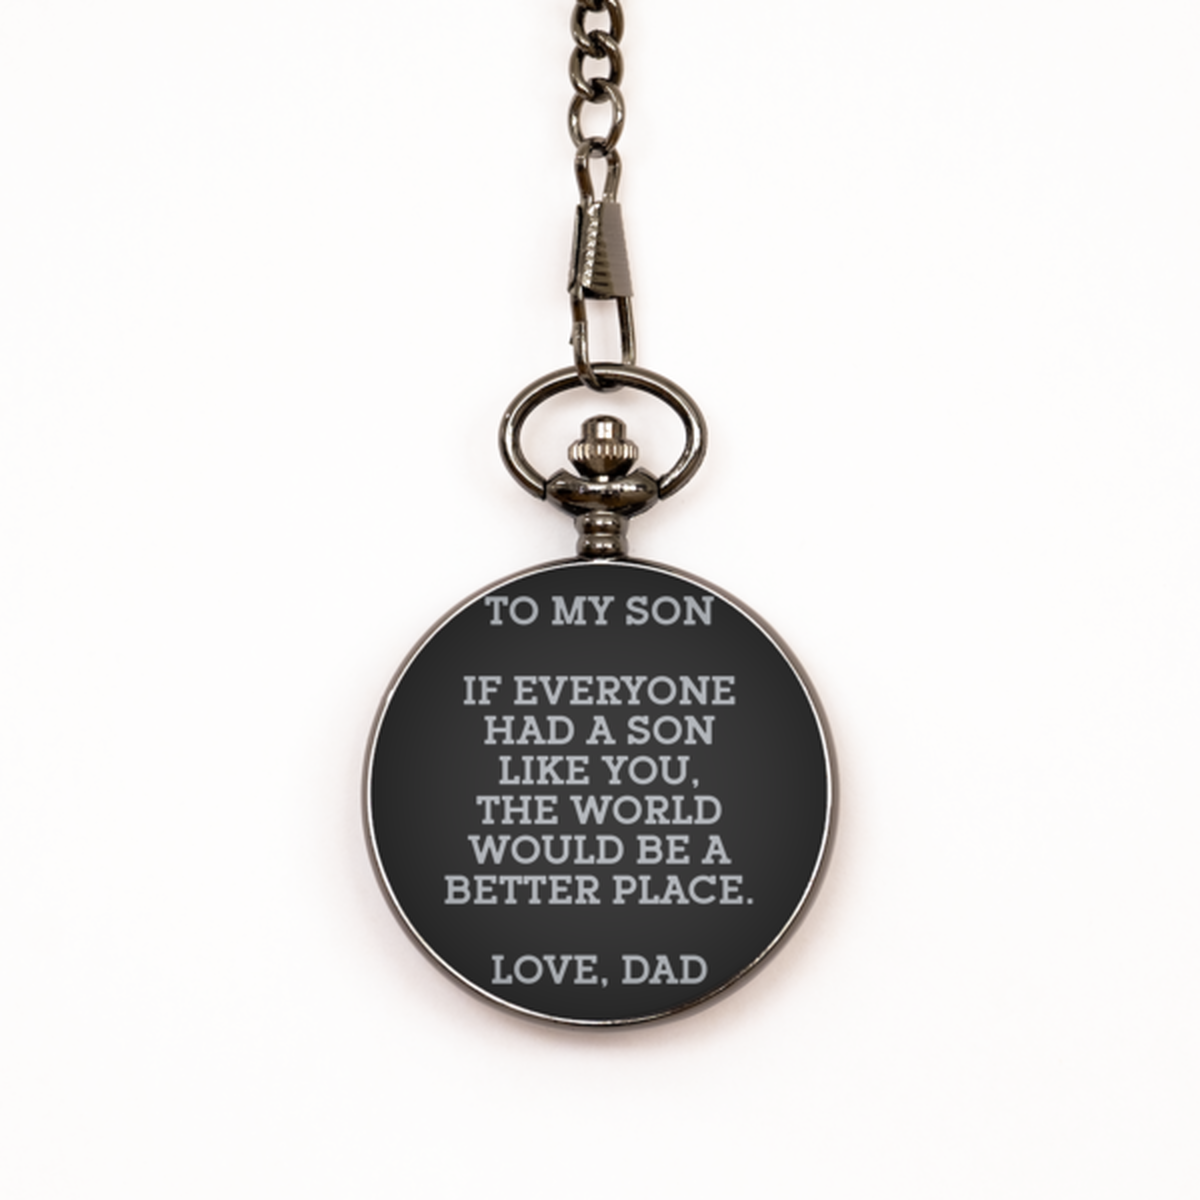 To My Son Black Pocket Watch, If Everyone Had A Son Like You, Graduation Day Gifts For Son From Dad, Birthday Gifts For Men